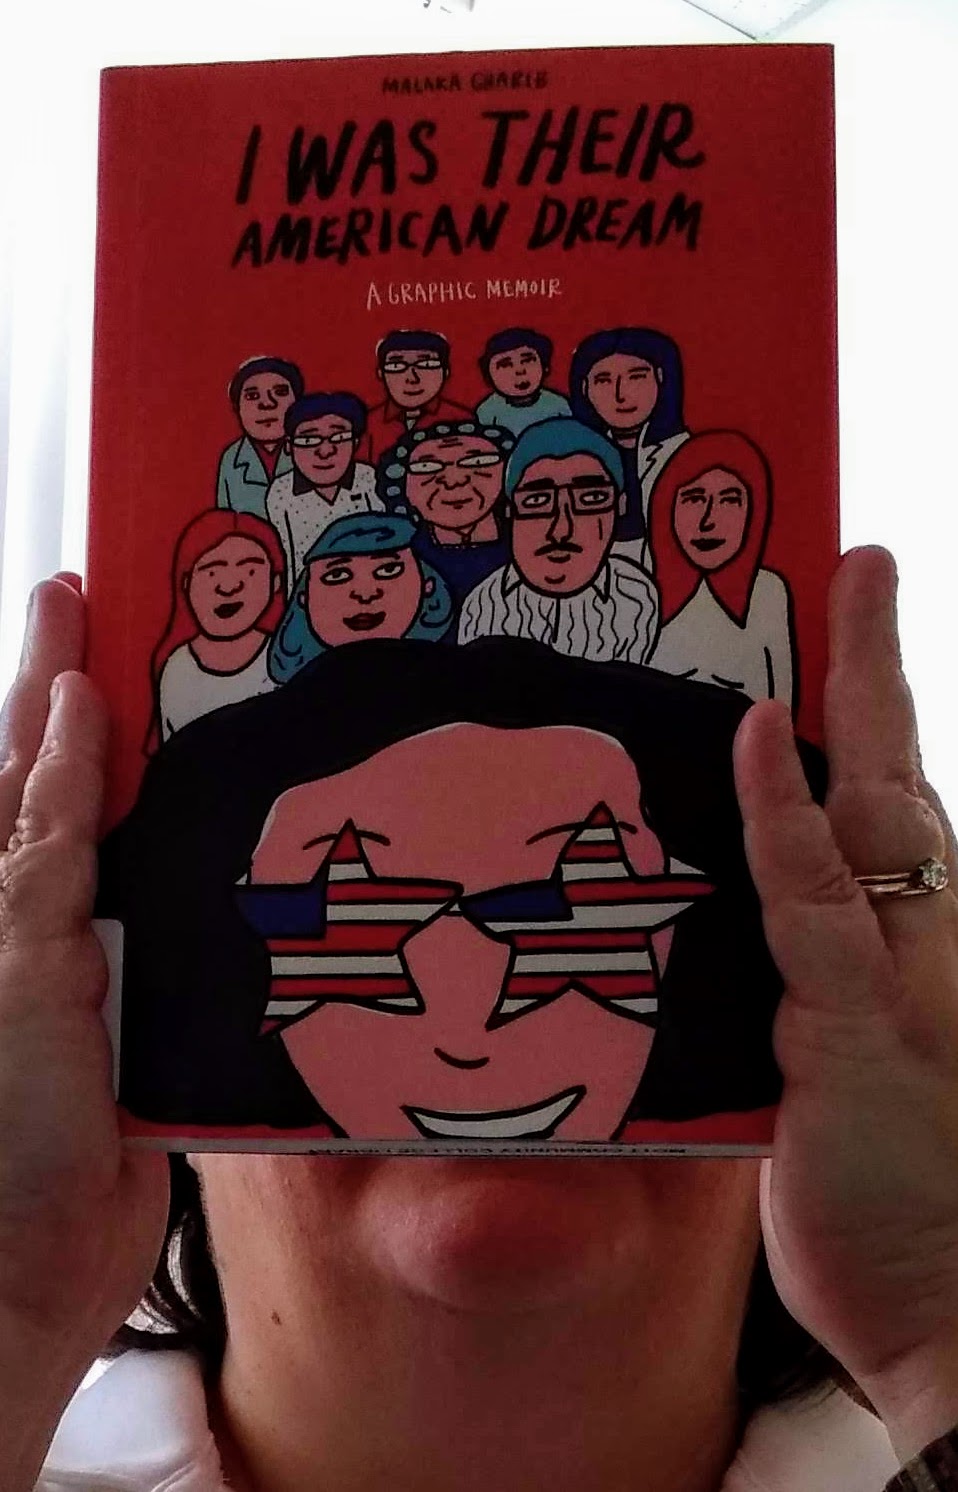 Jill covering face with face on a book